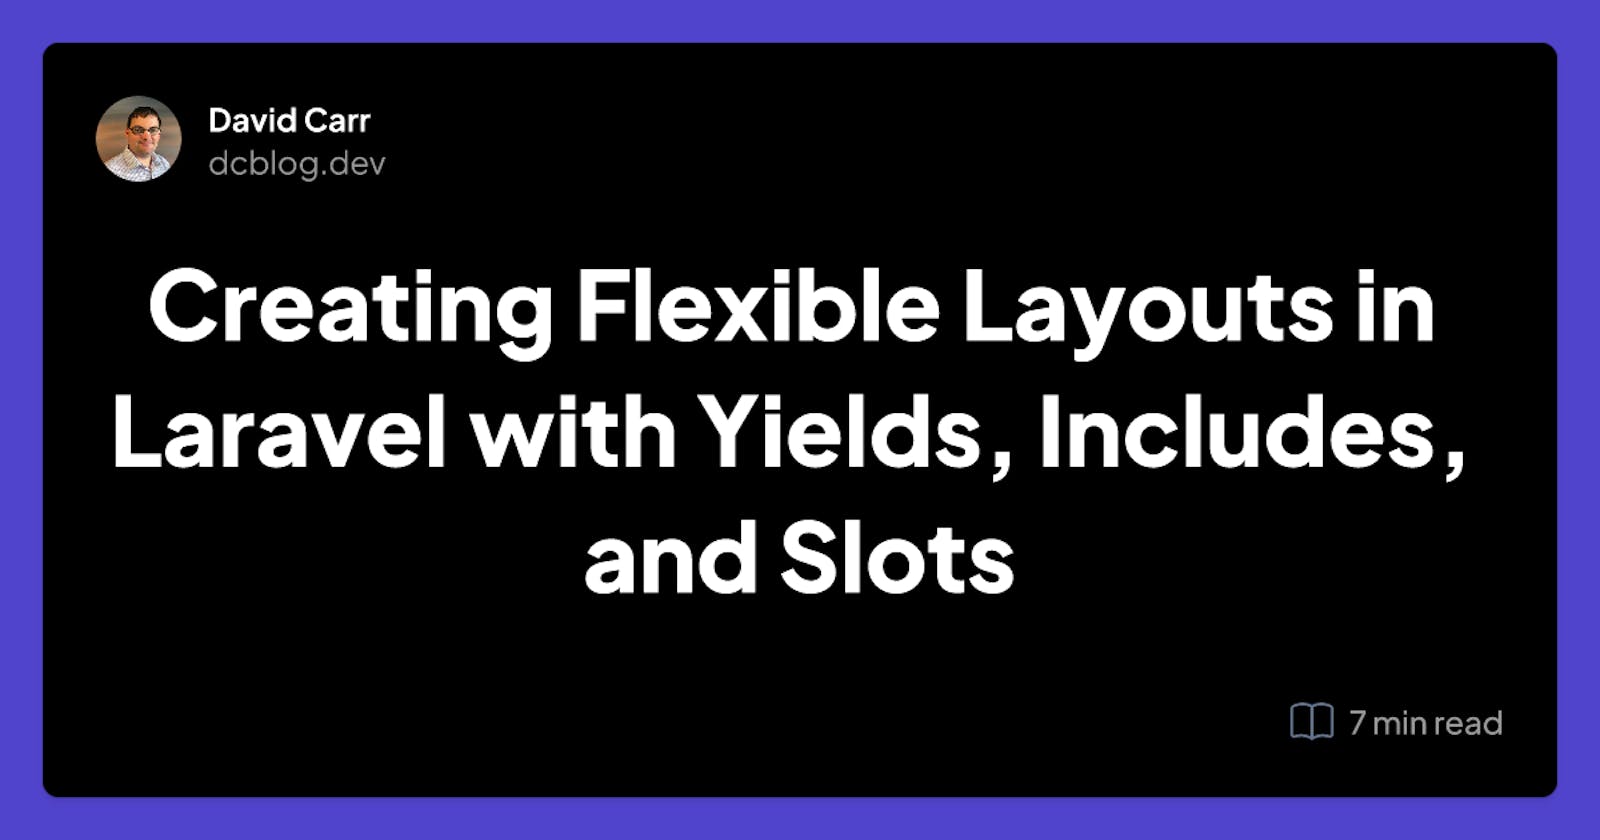 Creating Flexible Layouts in Laravel with Yields, Includes, and Slots